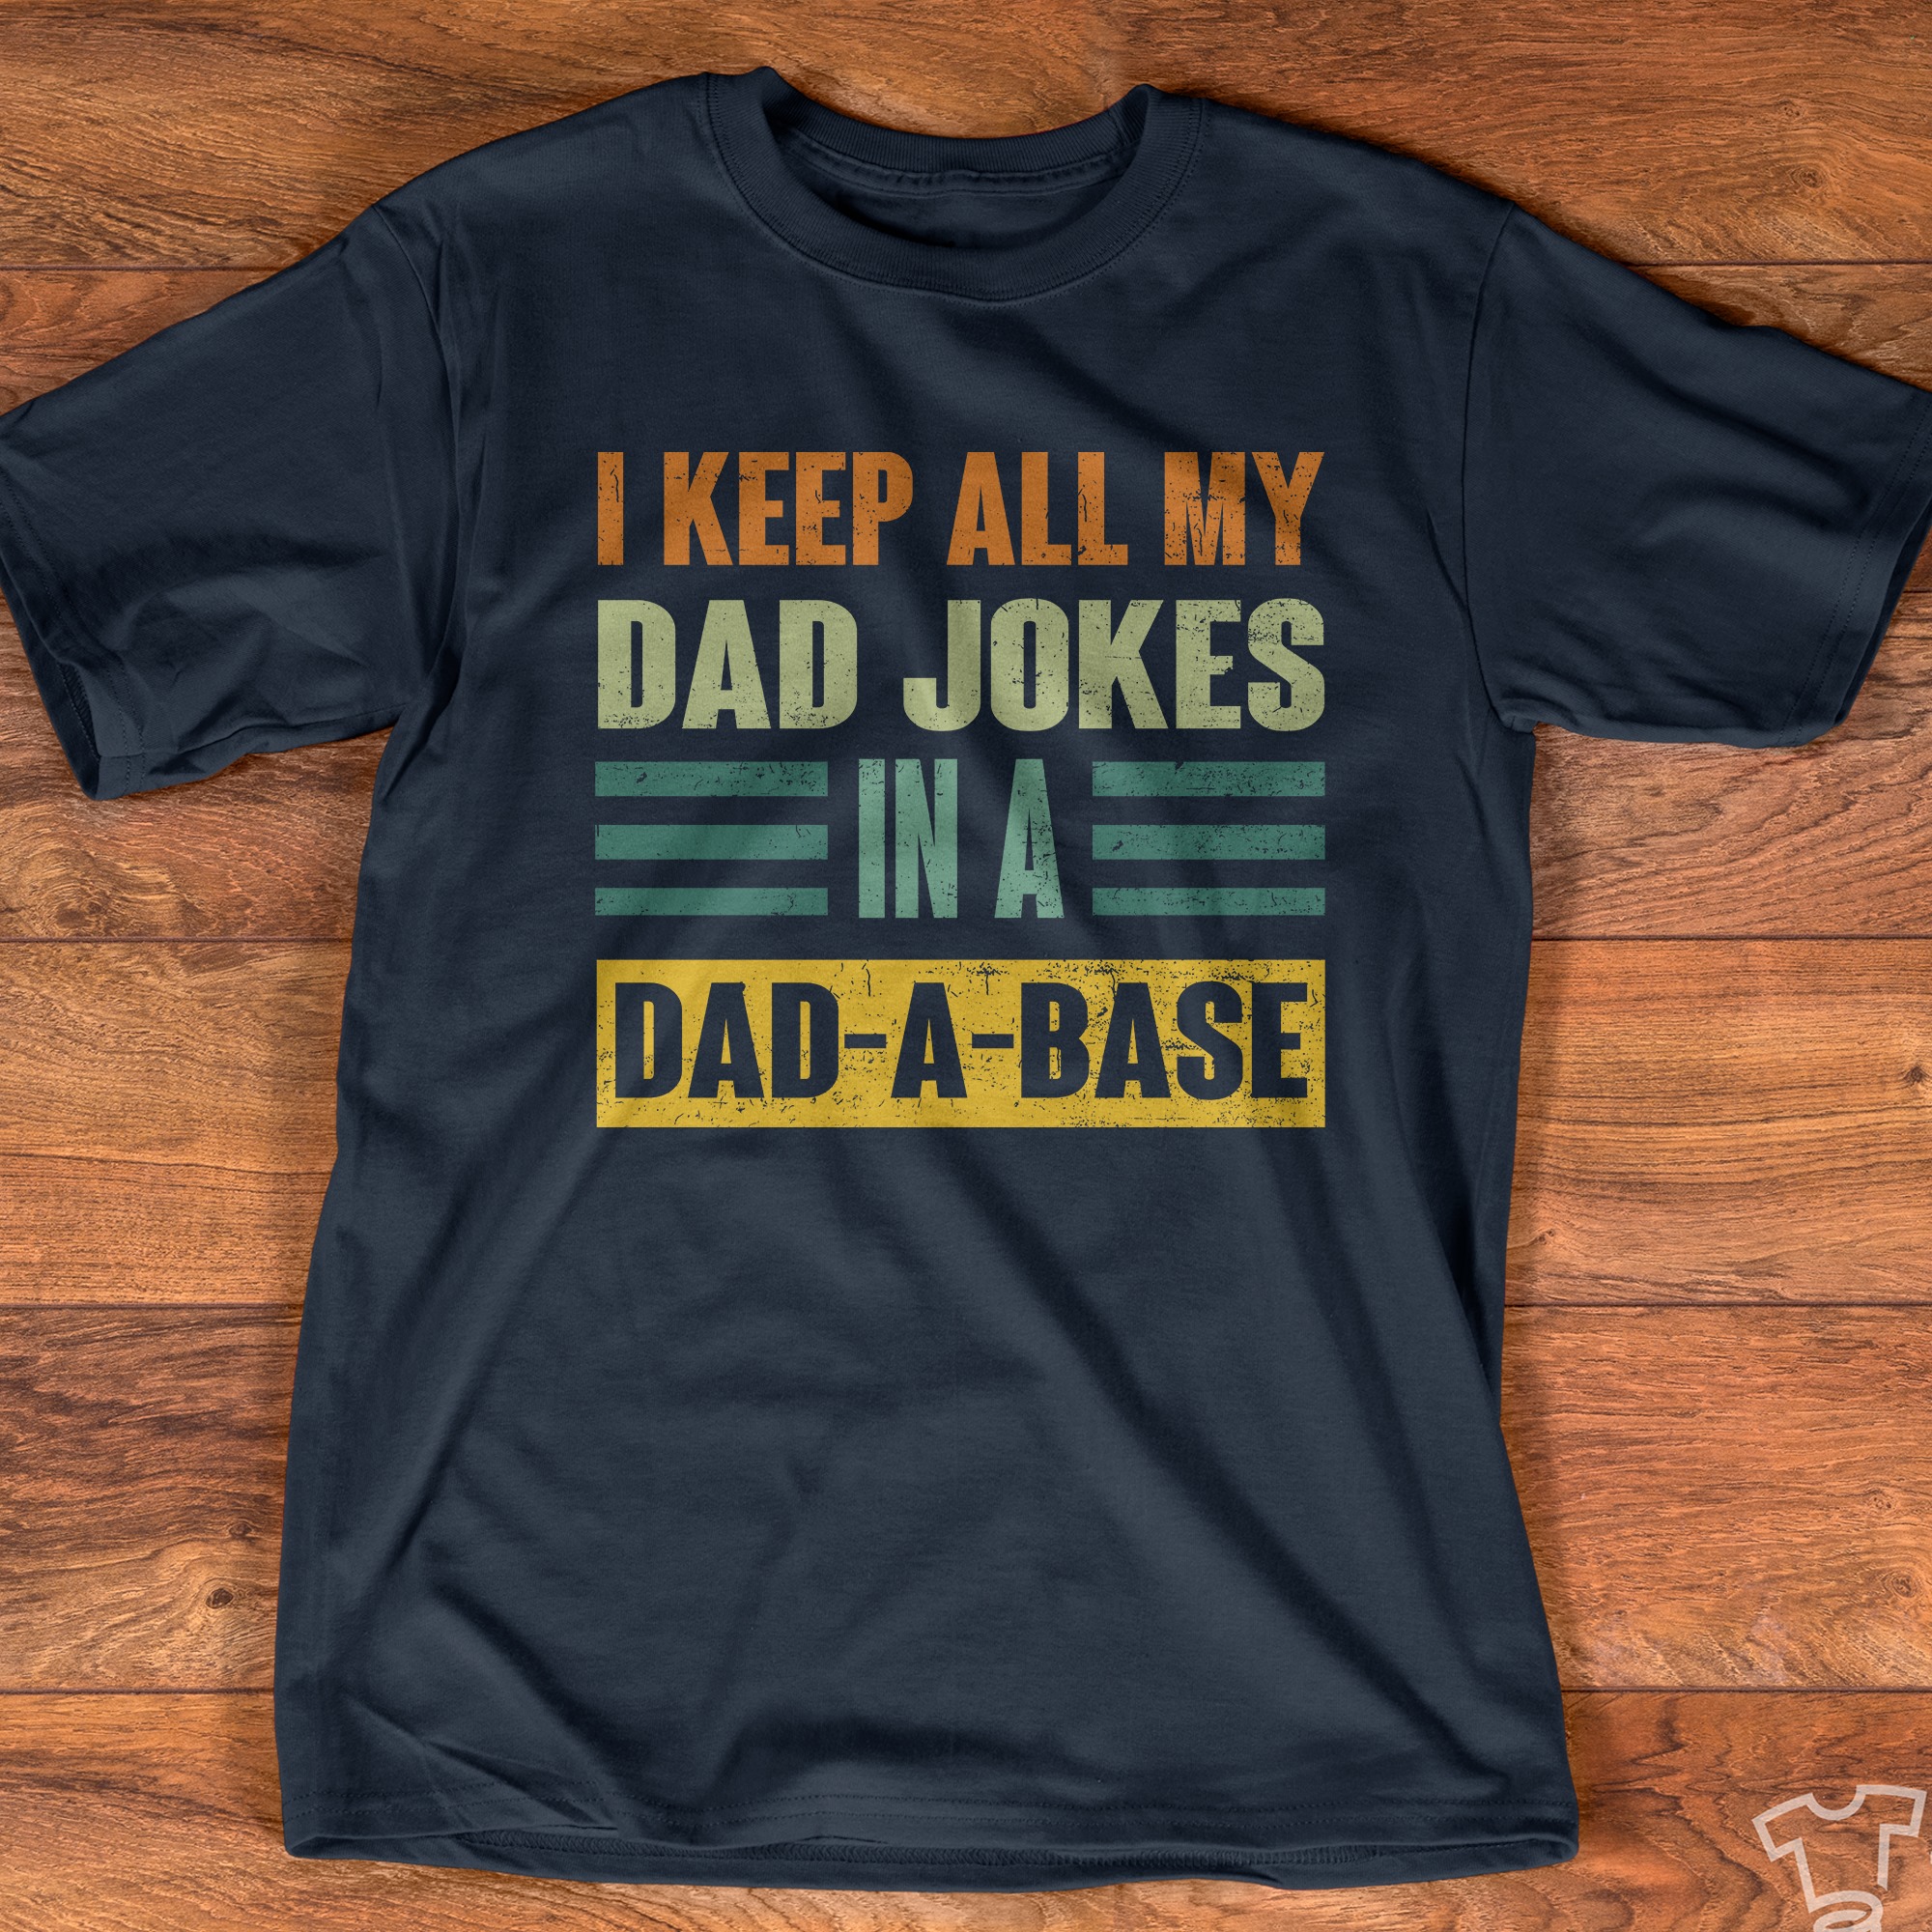 I keep all my dad jokes in dad-a-base - Father's day gift